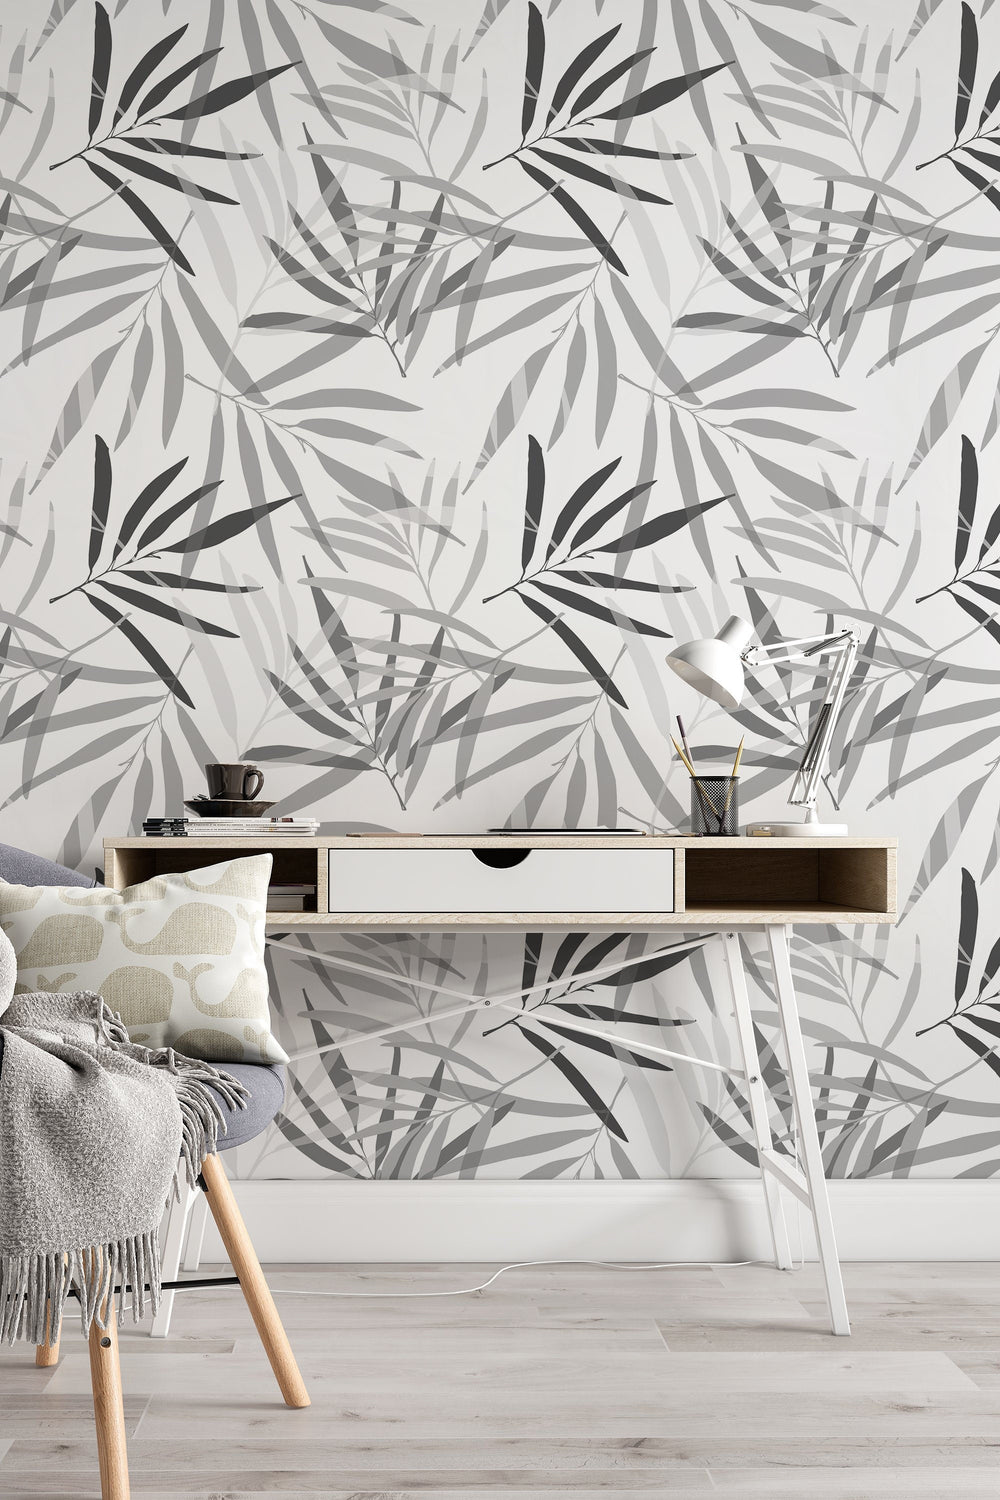 Pattern palm leaves wall mural, peel and stick wallpaper, wall decor design#3112